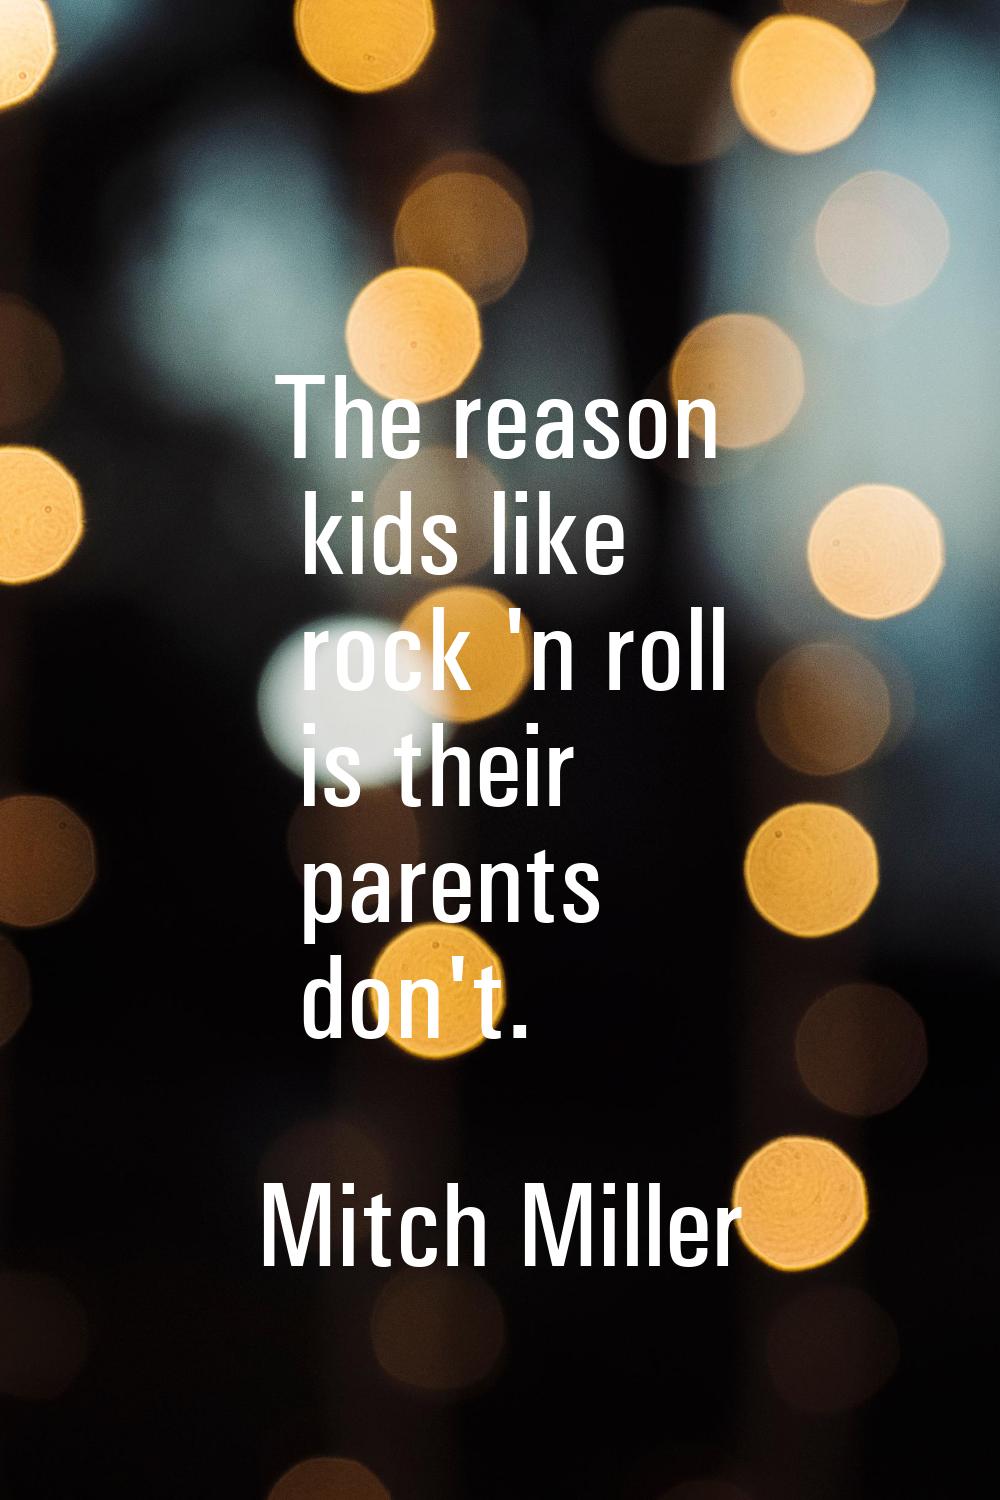 The reason kids like rock 'n roll is their parents don't.